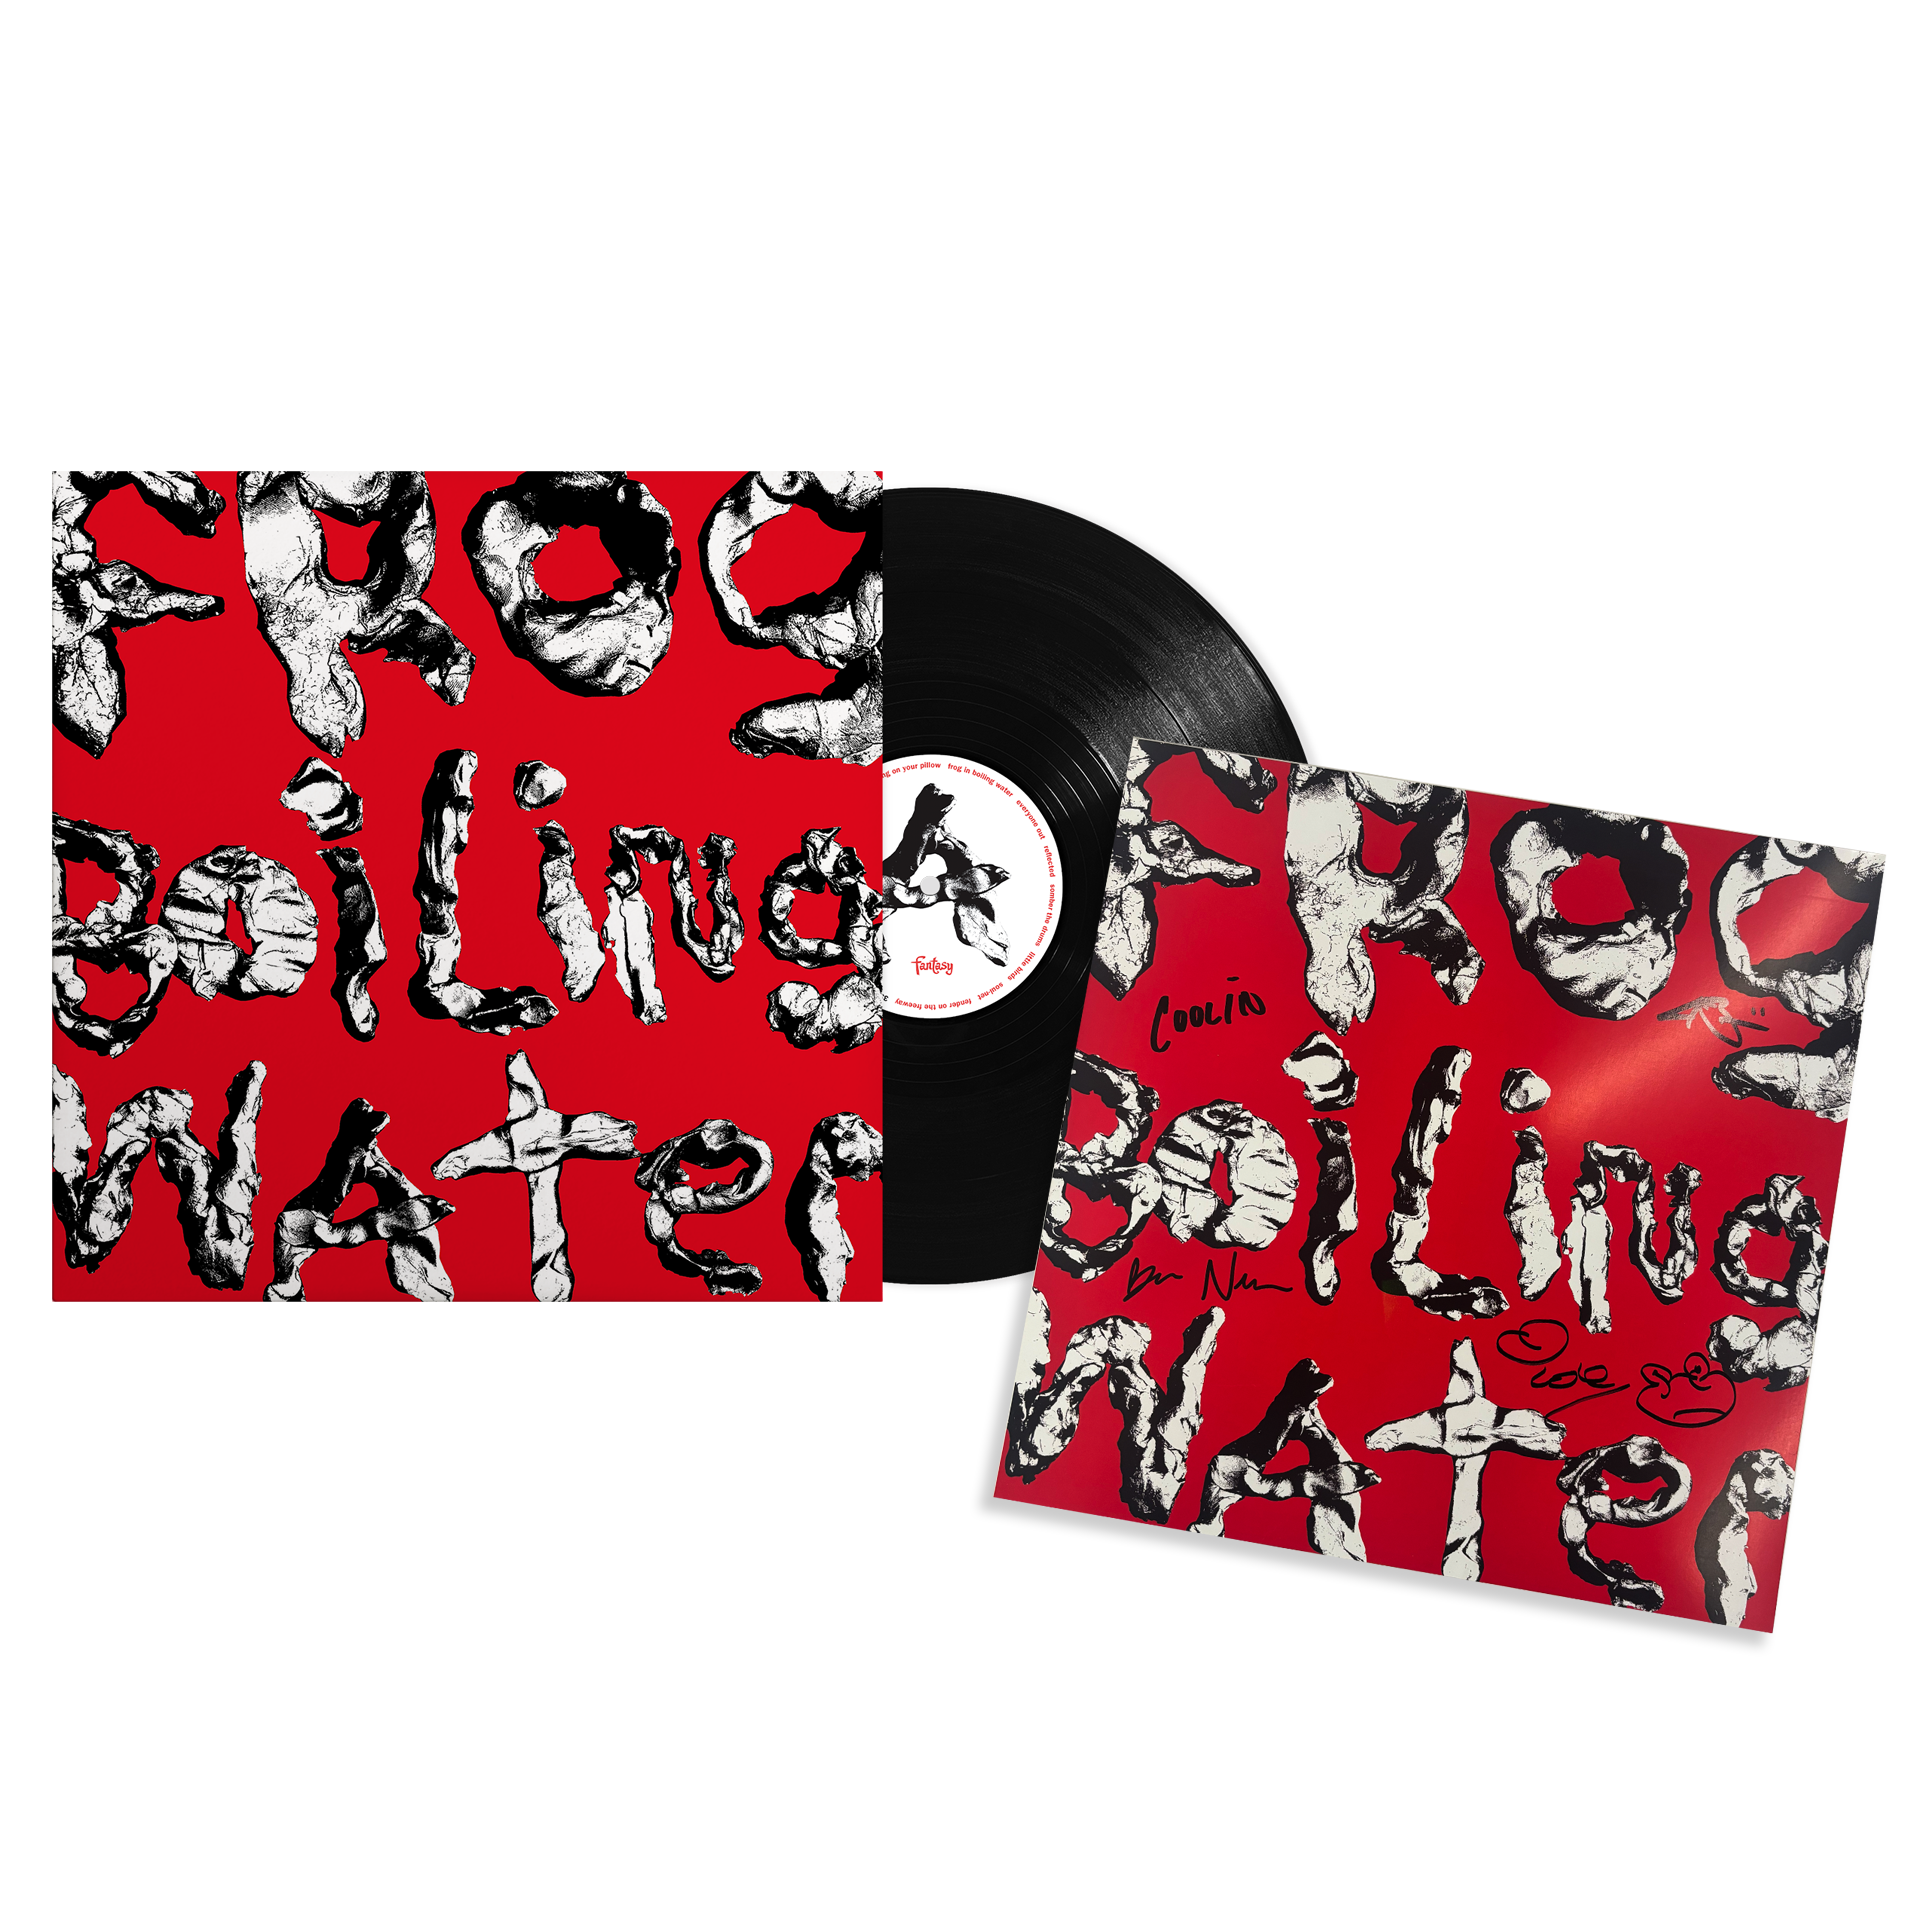 Frog In Boiling Water: Vinyl LP + Exclusive Signed Print